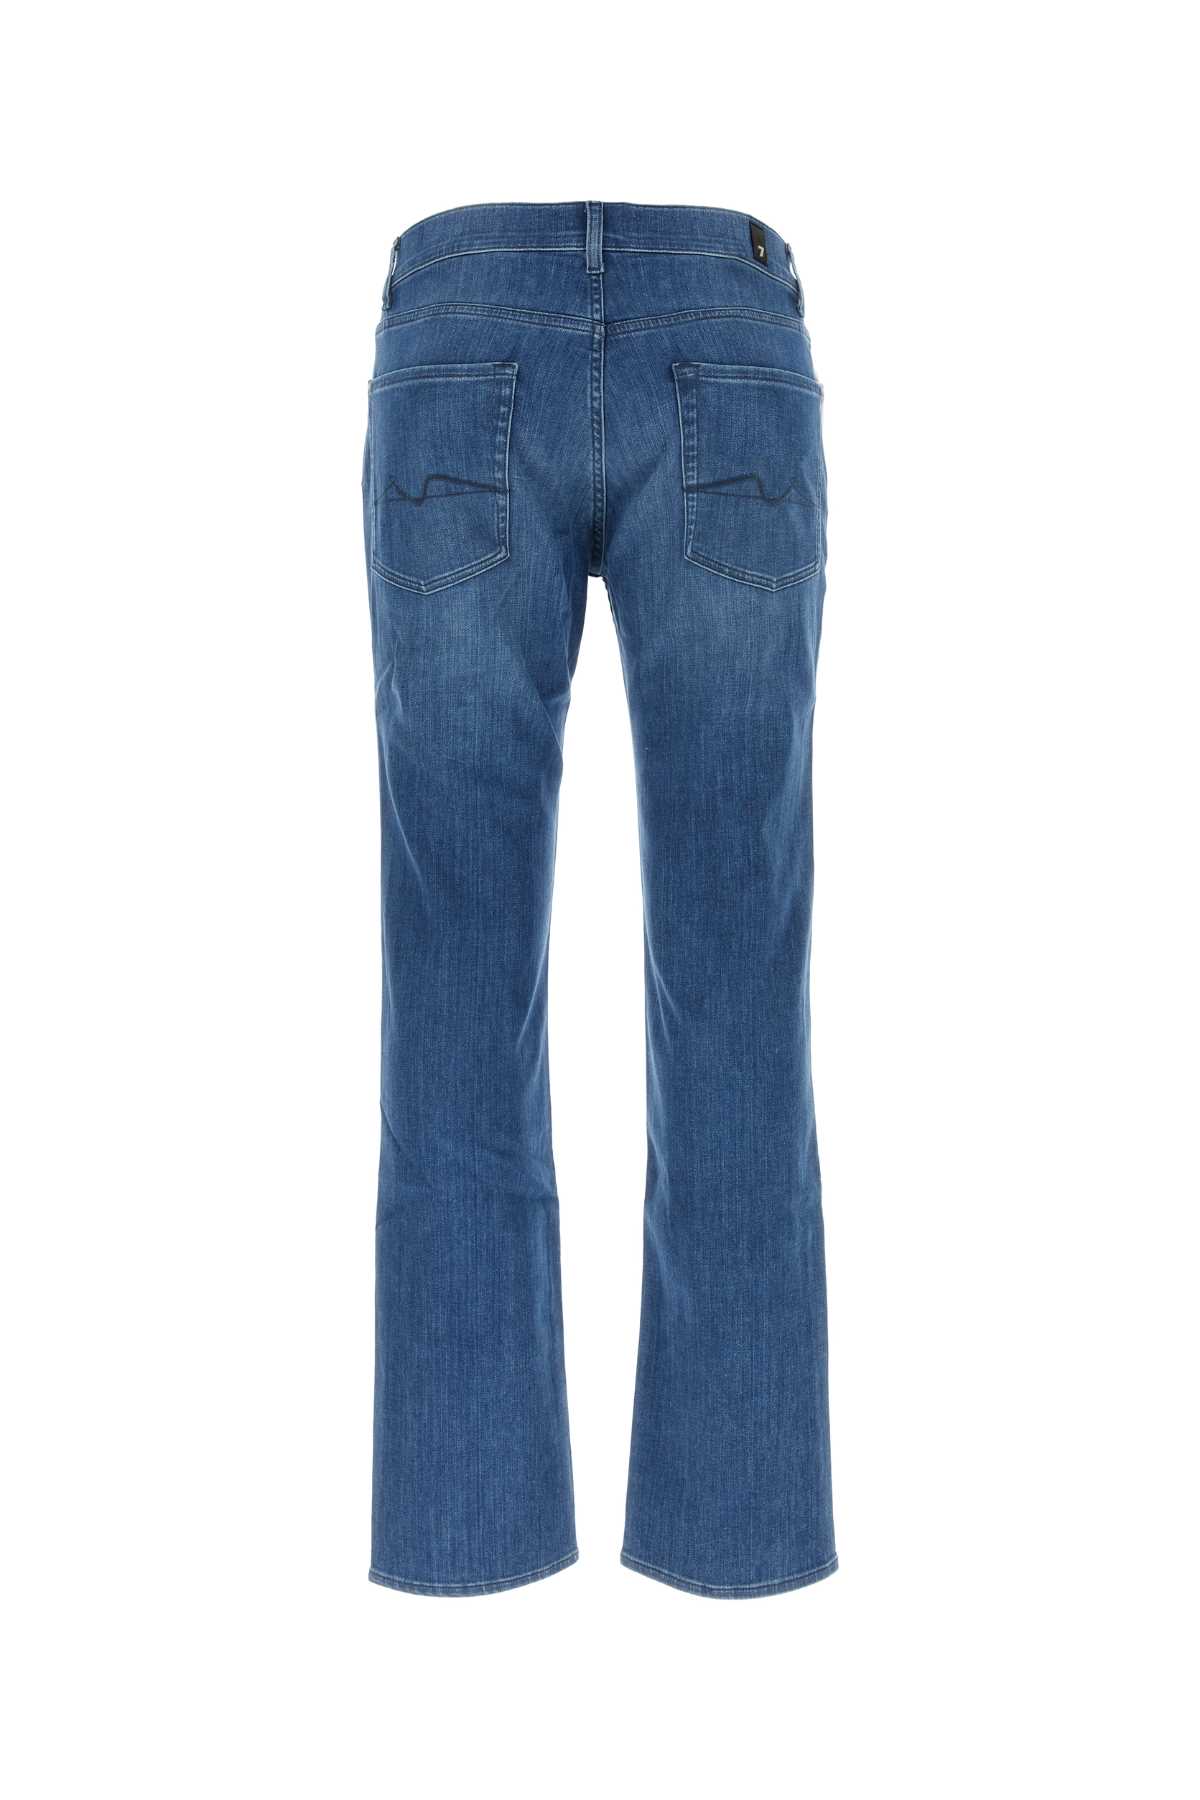 7 For All Mankind Stretch Denim Luxe Performance Jeans In Midblue